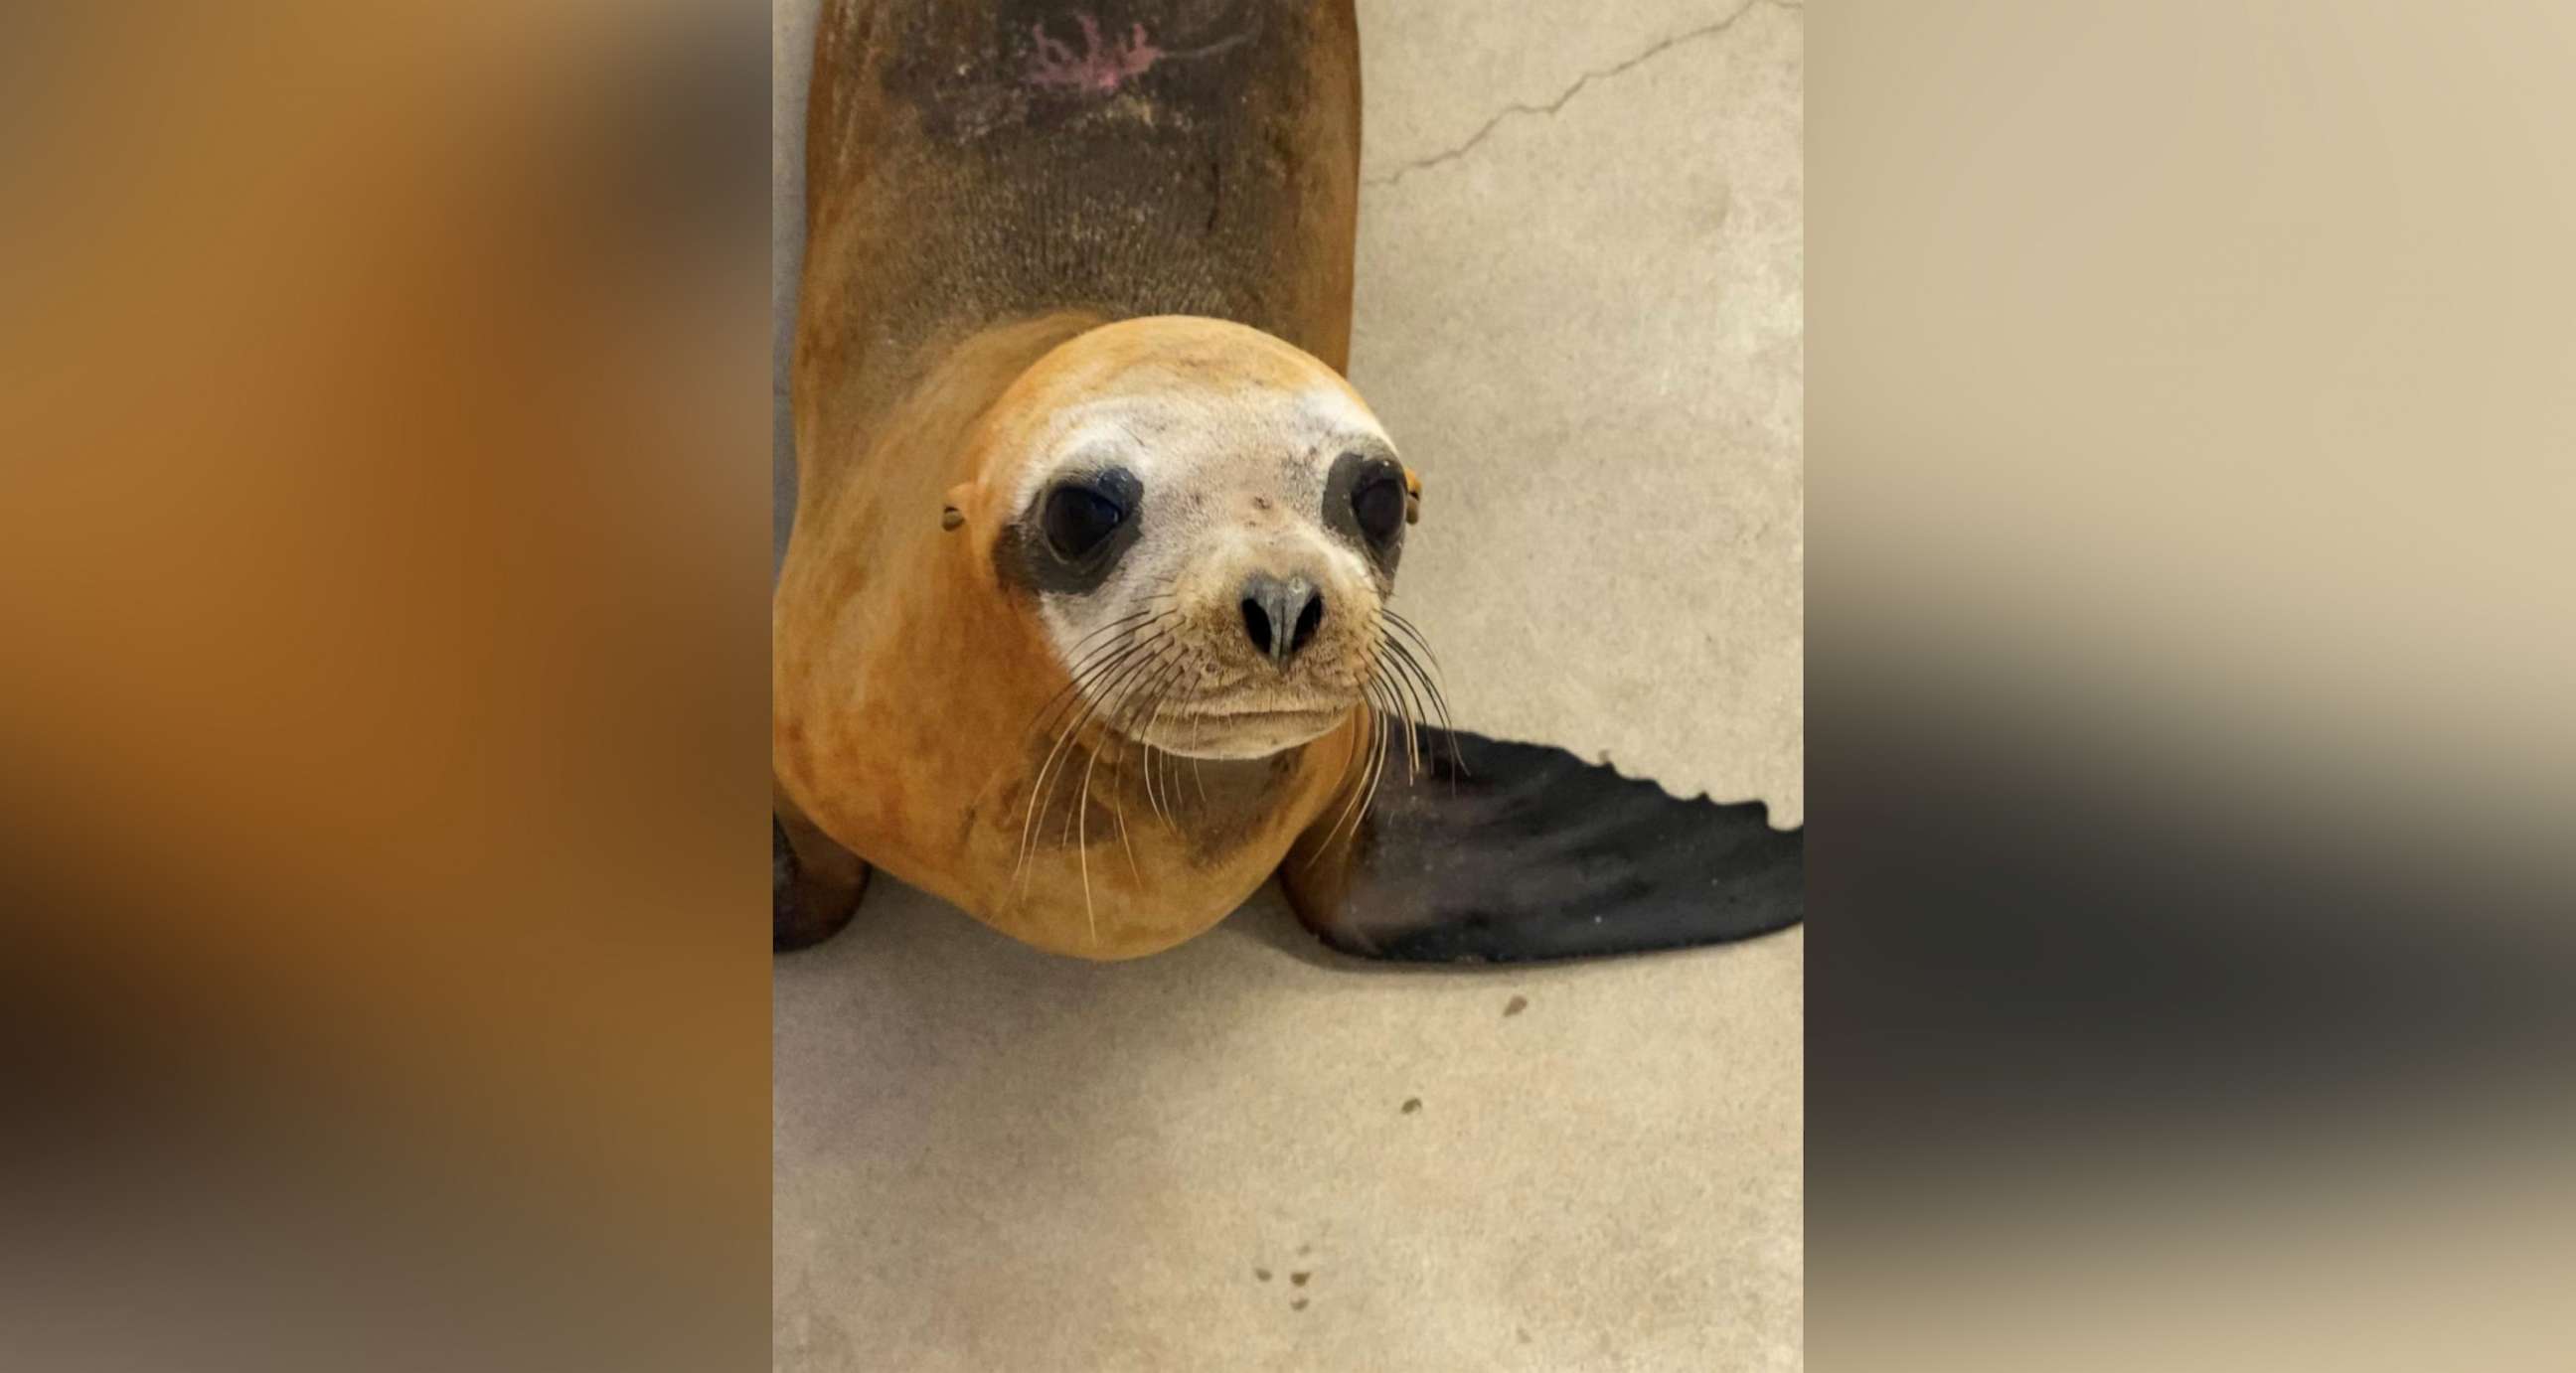 PHOTO: A one-year-old California sea lion nicknamed Mandalorian was rescued at Newport Beach, Calif., on Dec. 16, 2019 by the Pacific Marine Mammal Center.